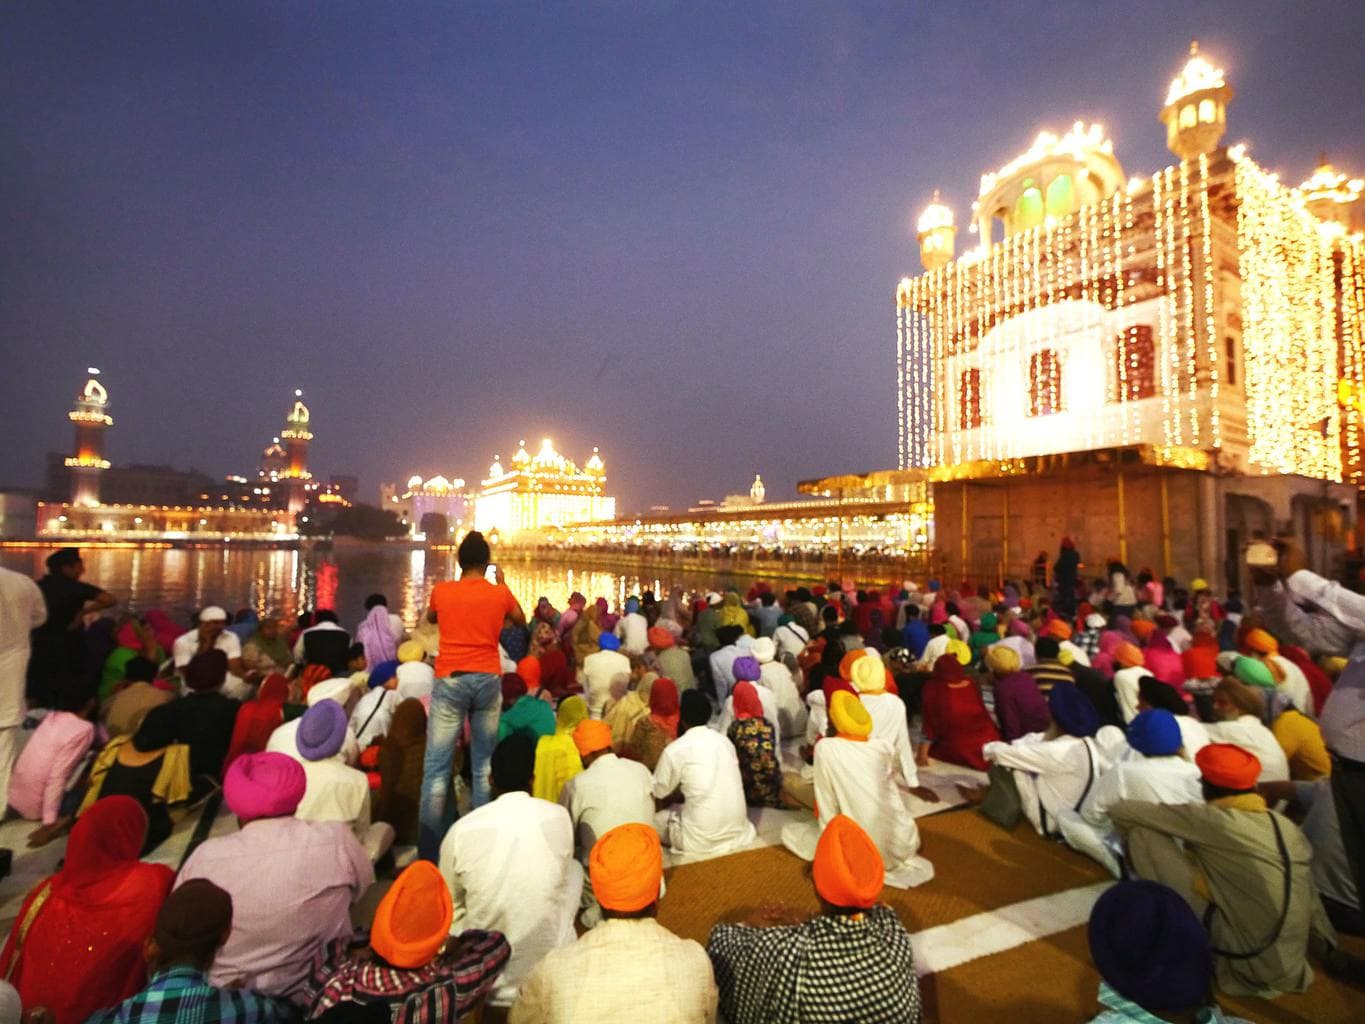 Devotees at The Golden Temple Amritsar